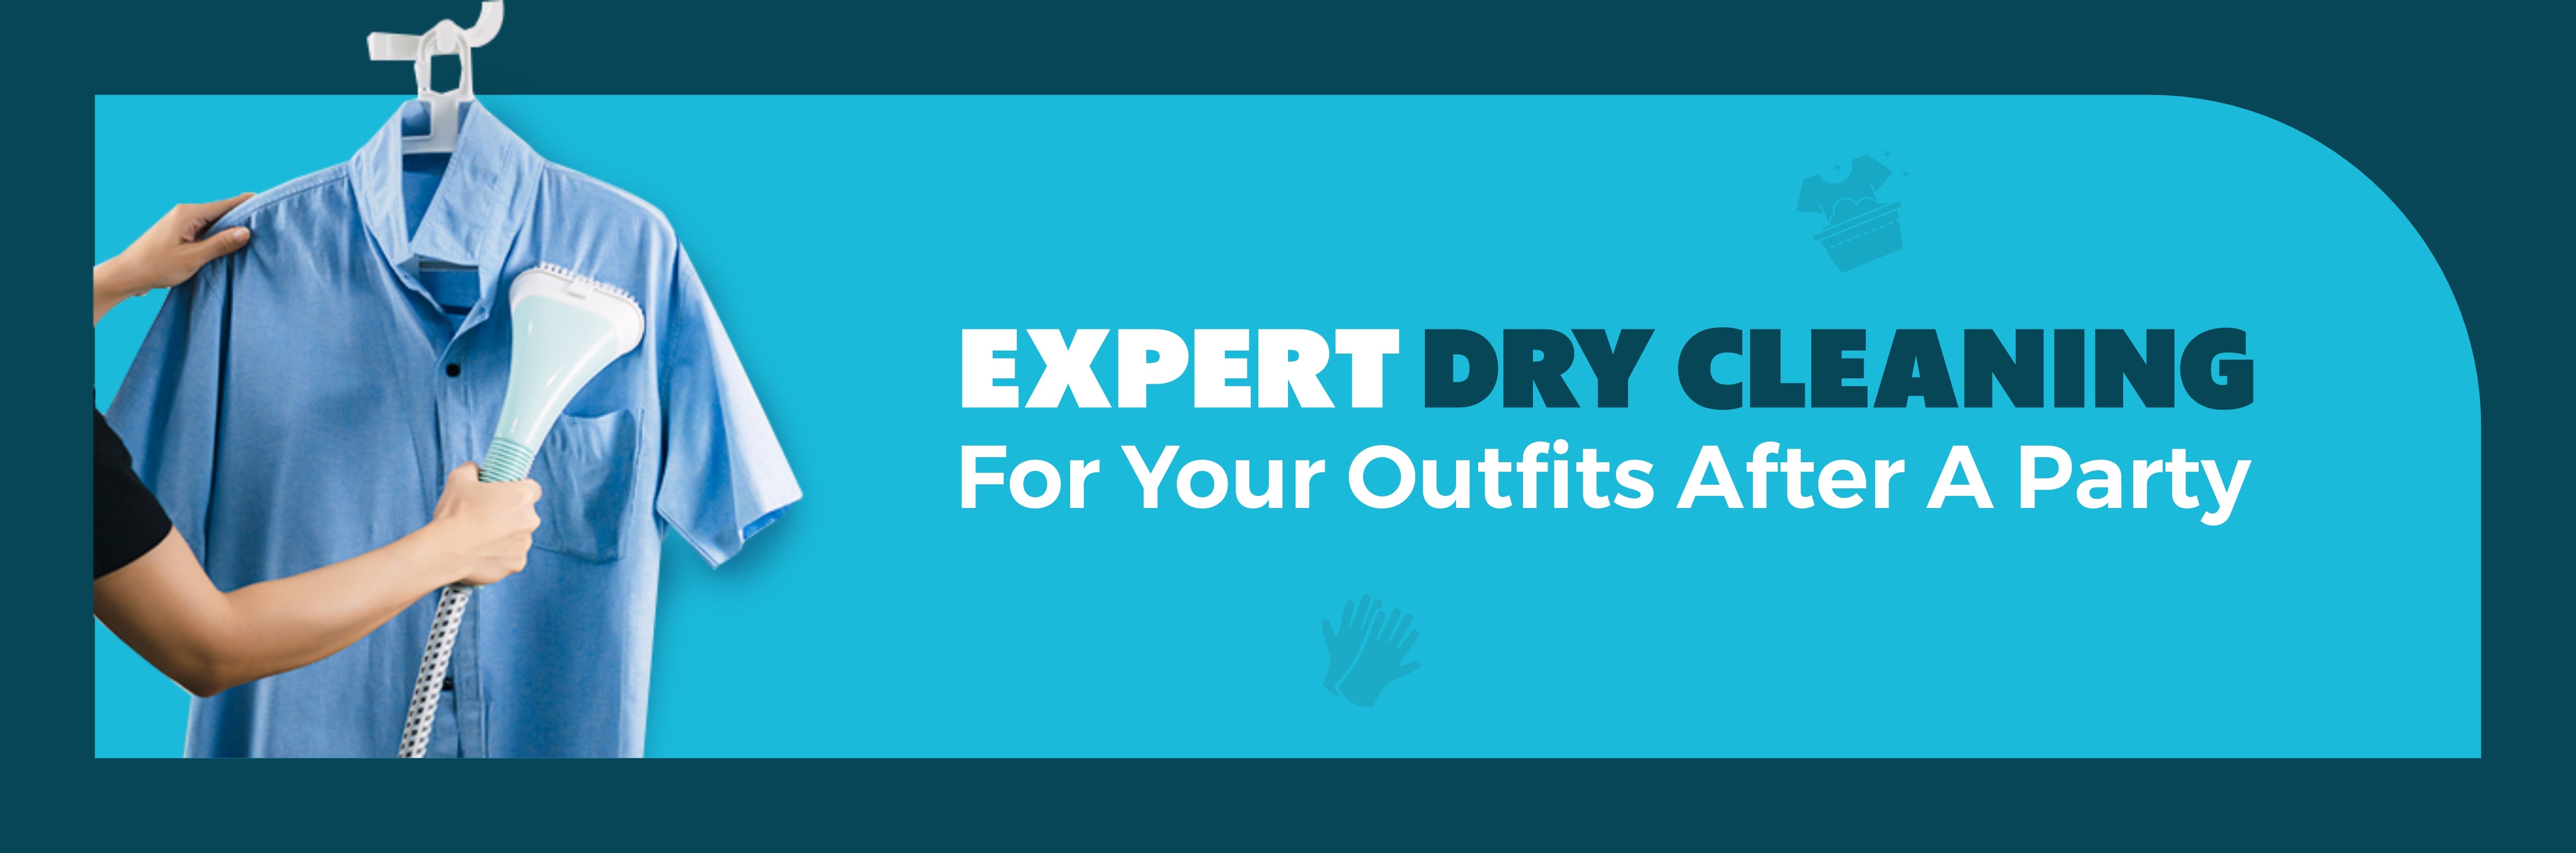 Expert dry cleaning for your outfits after a party